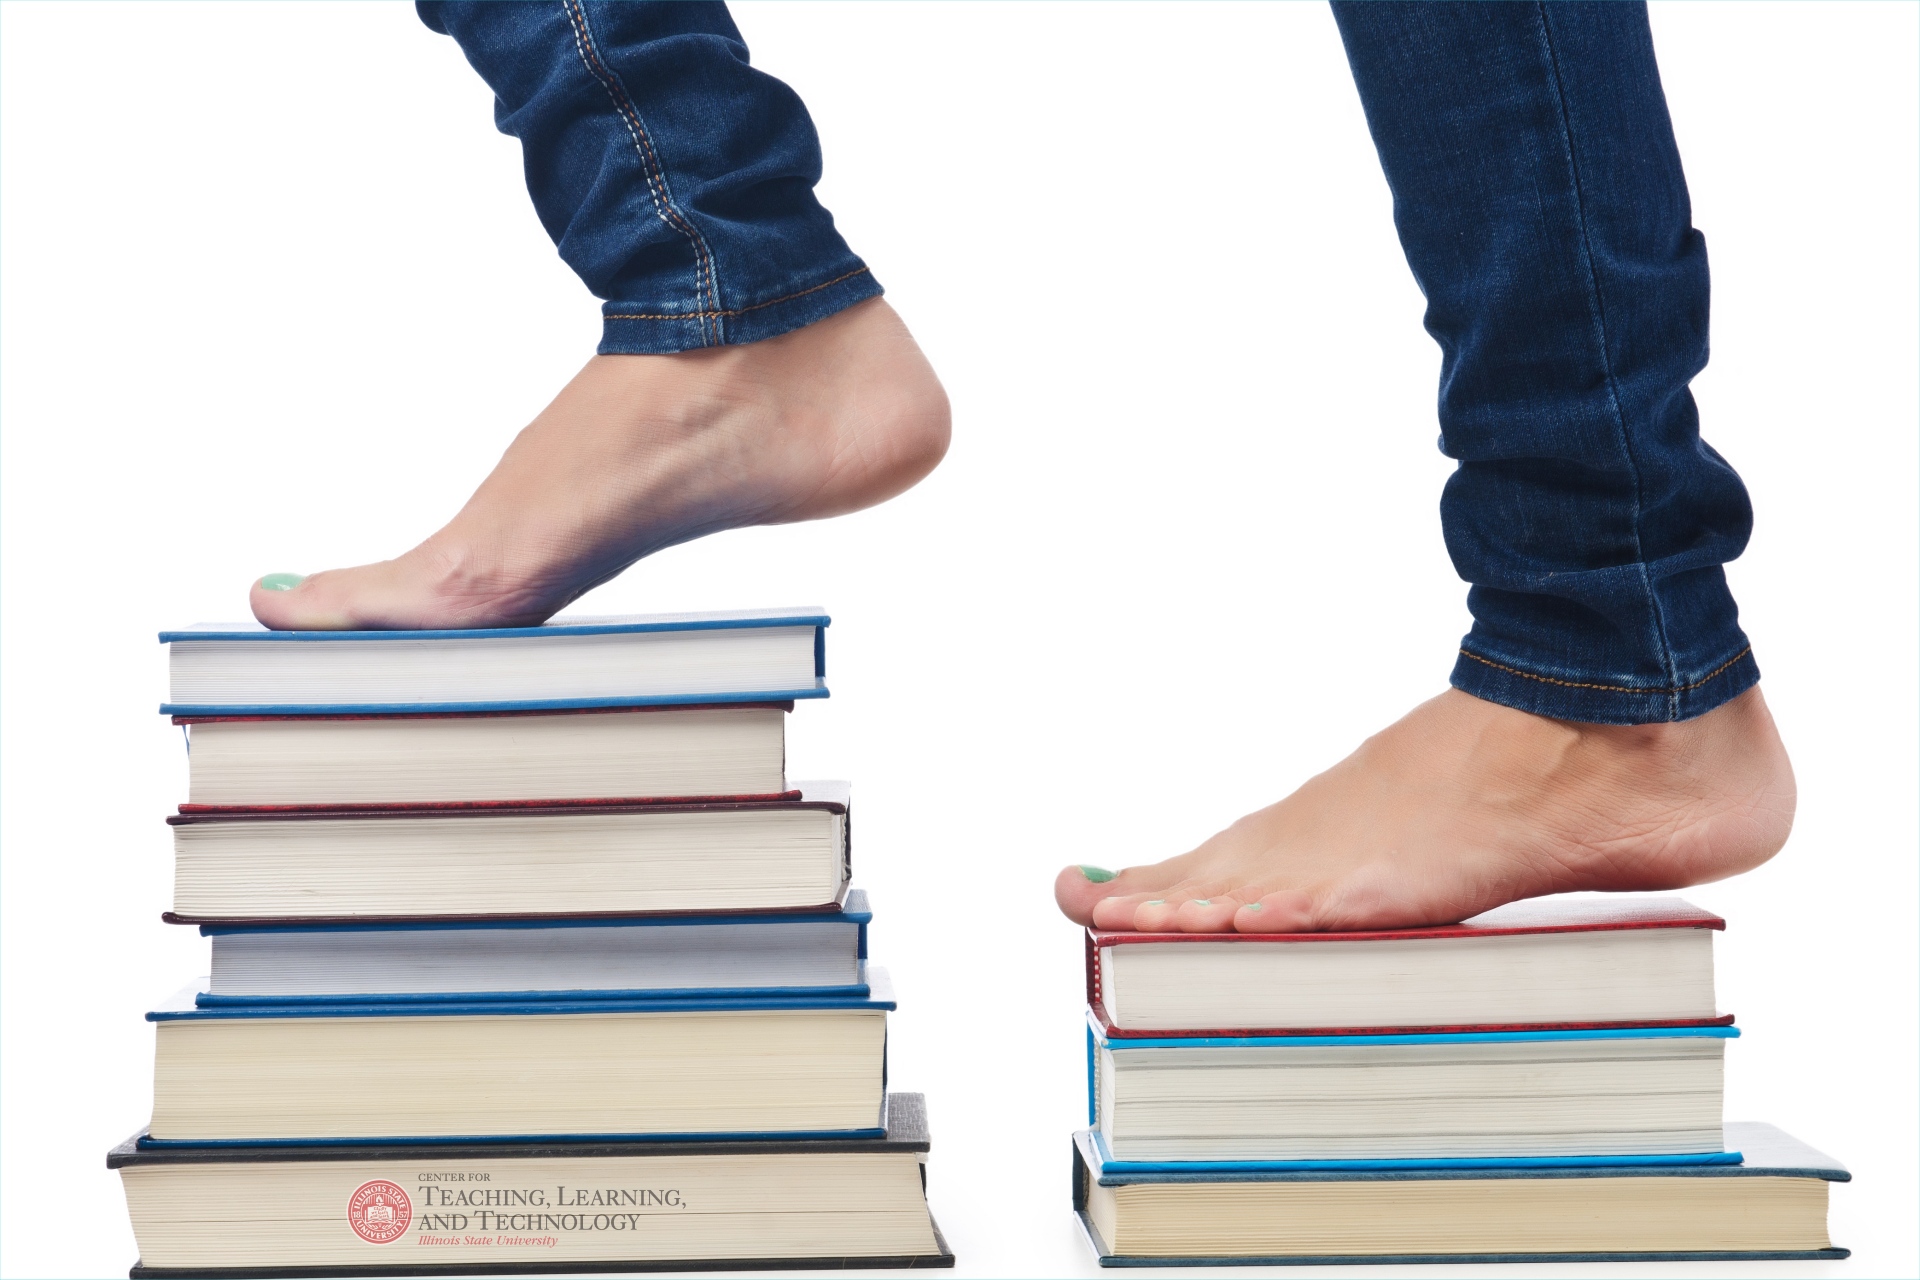 Bare feet on a pile of books